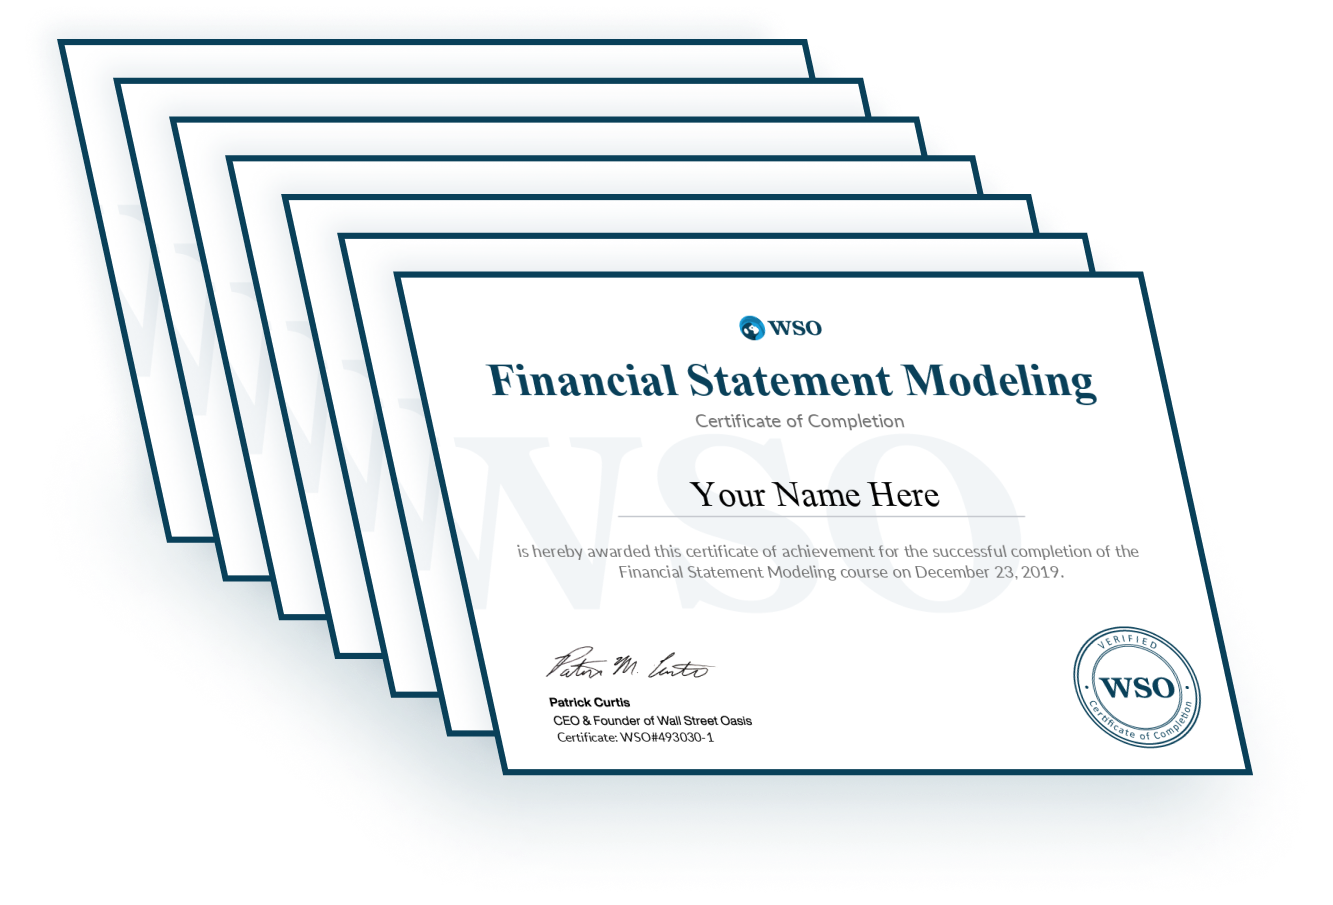 Financial Statement Modeling Completion Certification